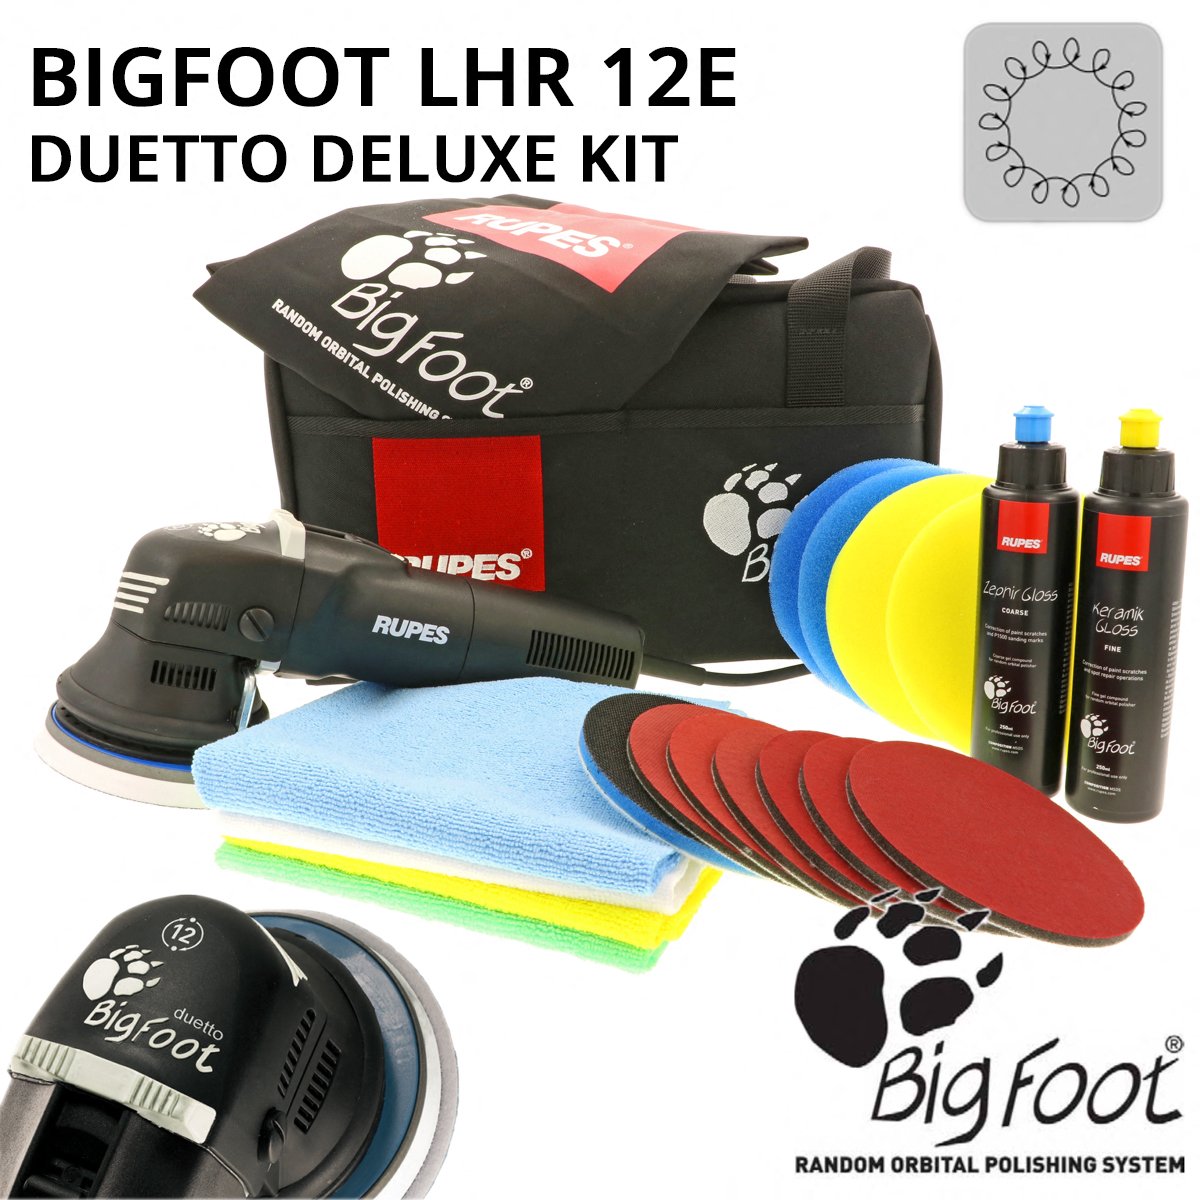 Big Foot LHR12E Duetto Deluxe Kit